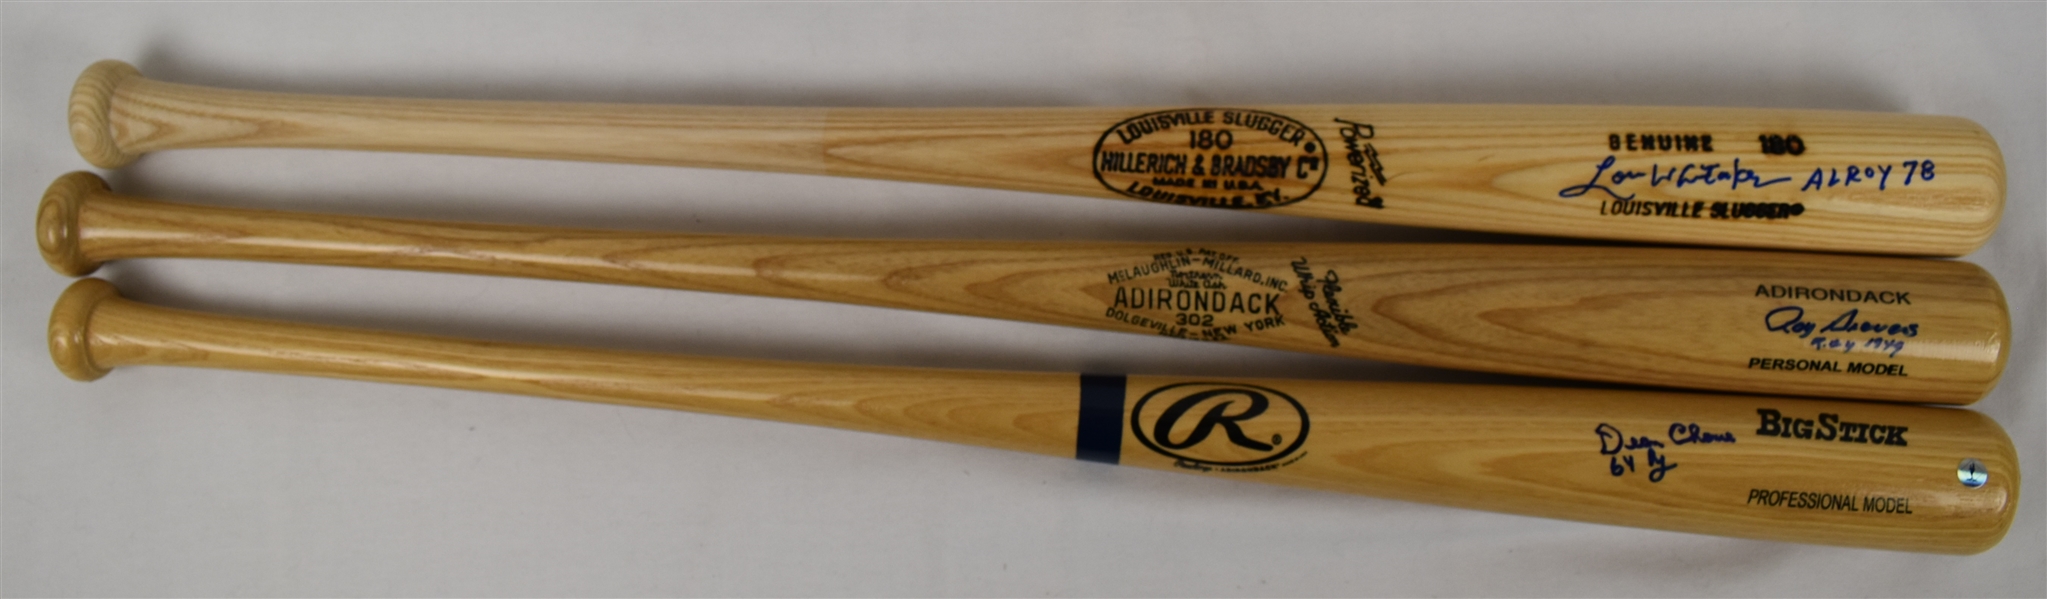 Rookie of the Year Lot of 3 Autographed Bats